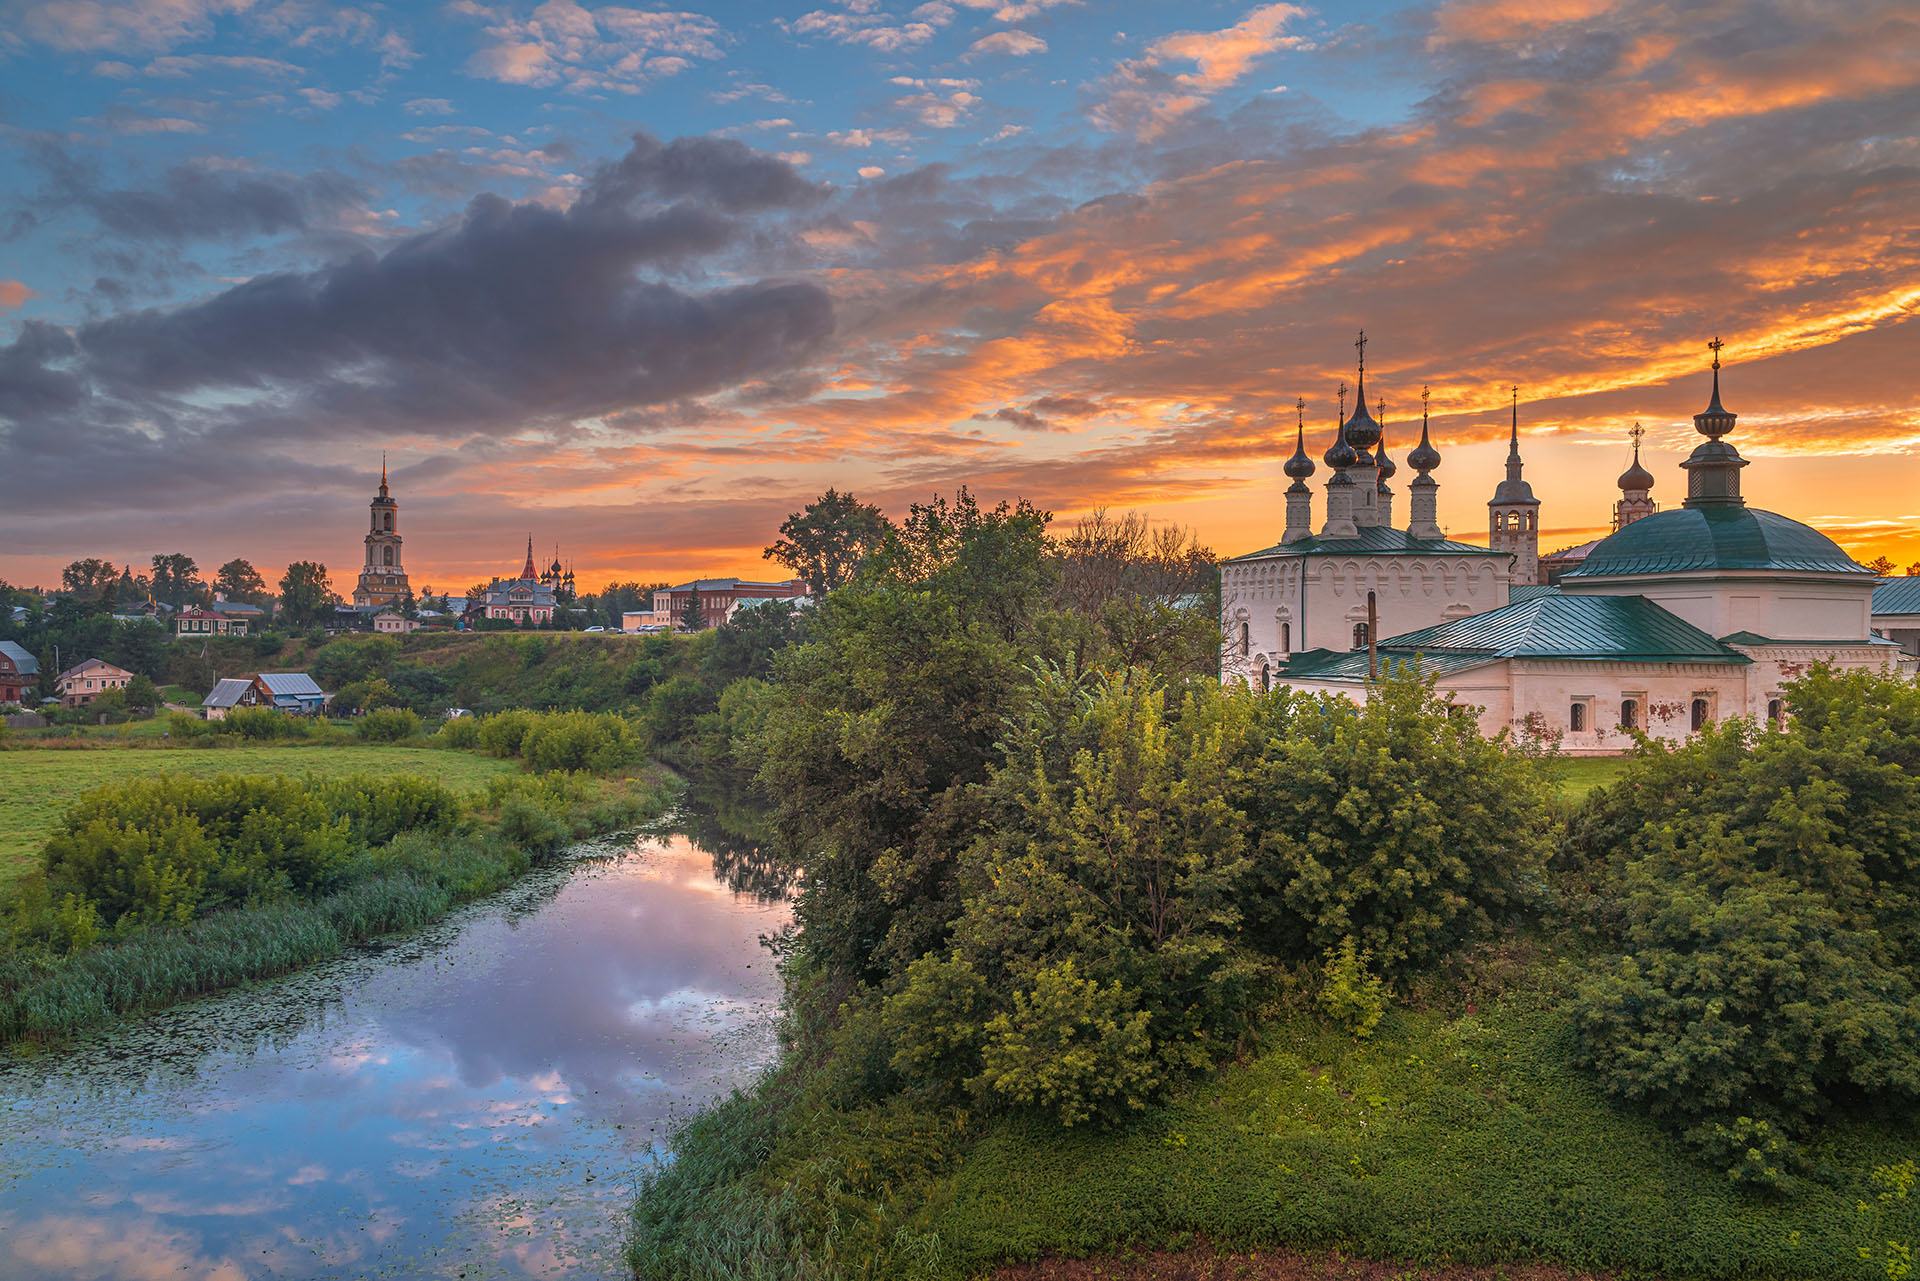 Beautiful wide angle view of the historical town of Suzdal', Gol